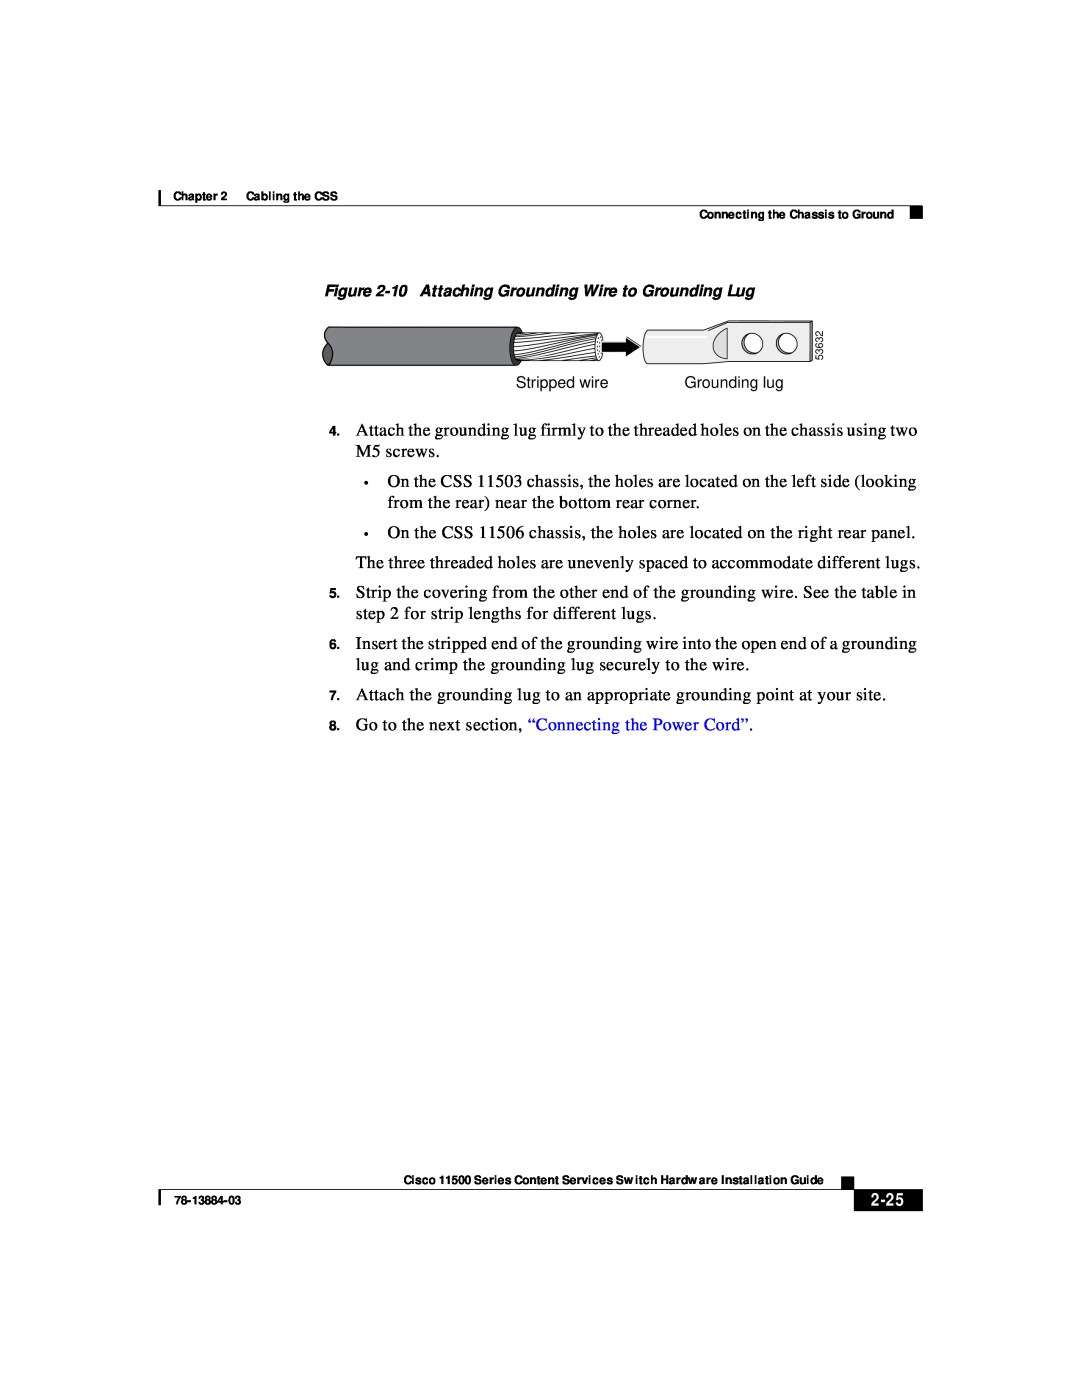 Cisco Systems 11500 Series manual Go to the next section, “Connecting the Power Cord”, 2-25 